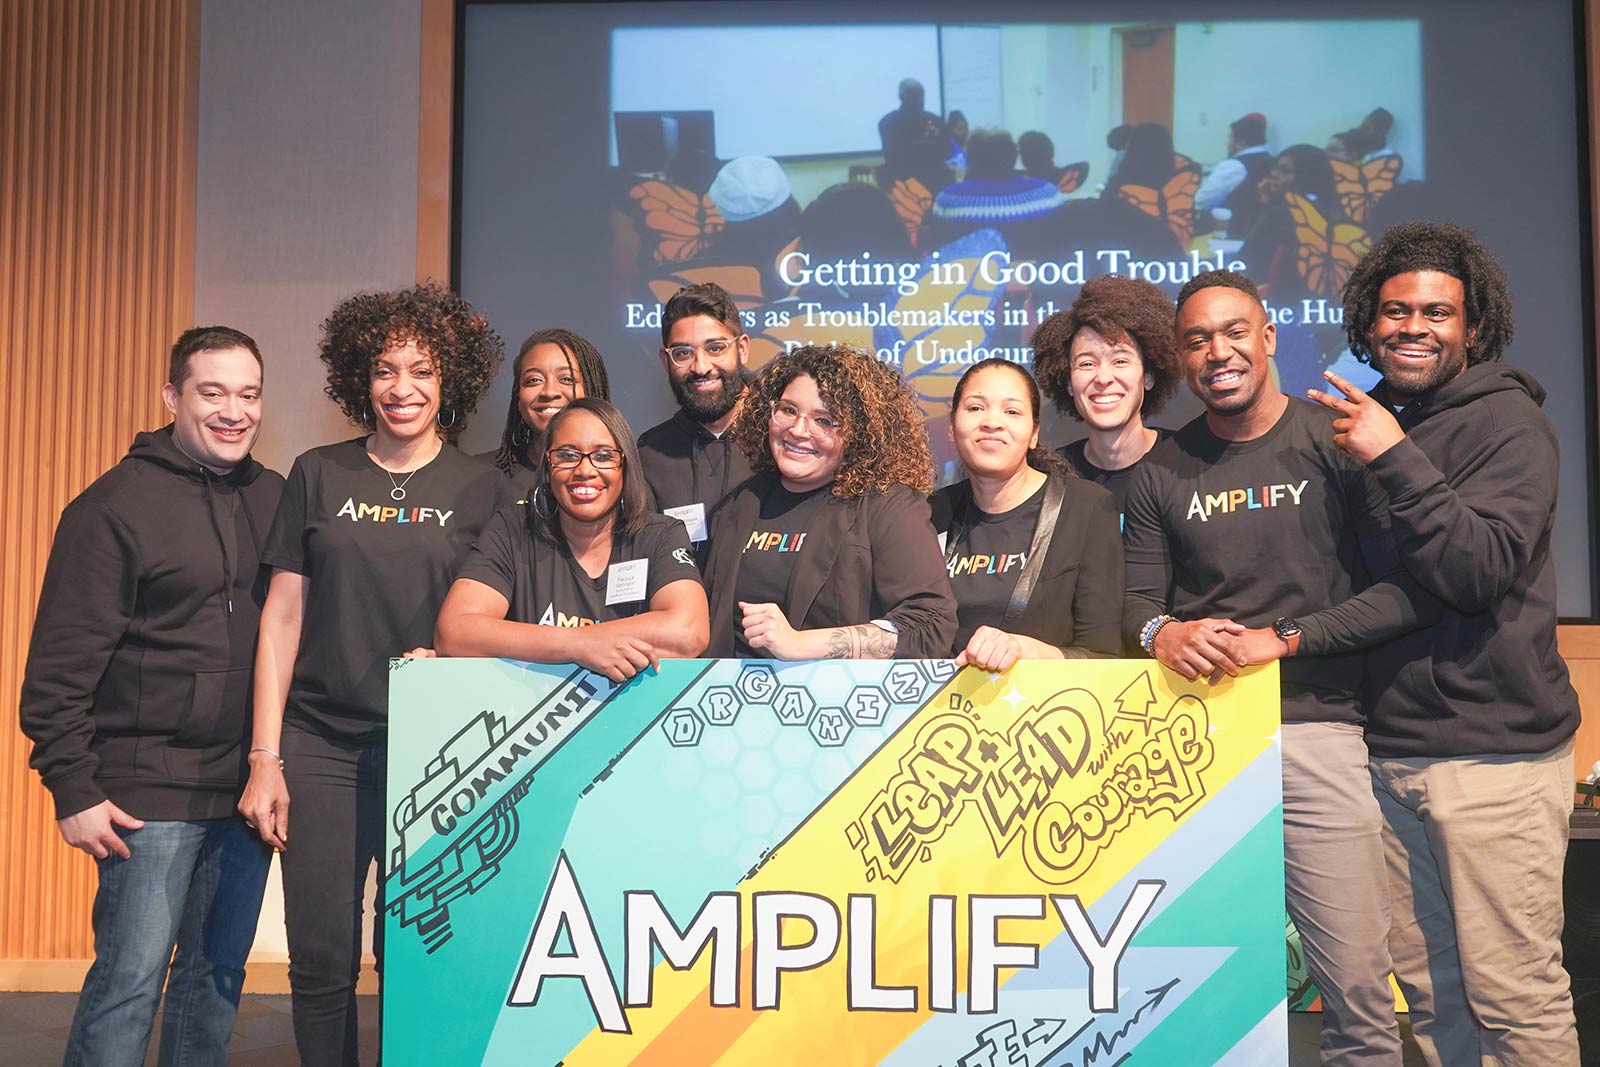 Amplify attendees pose for photo behind Amplify sign